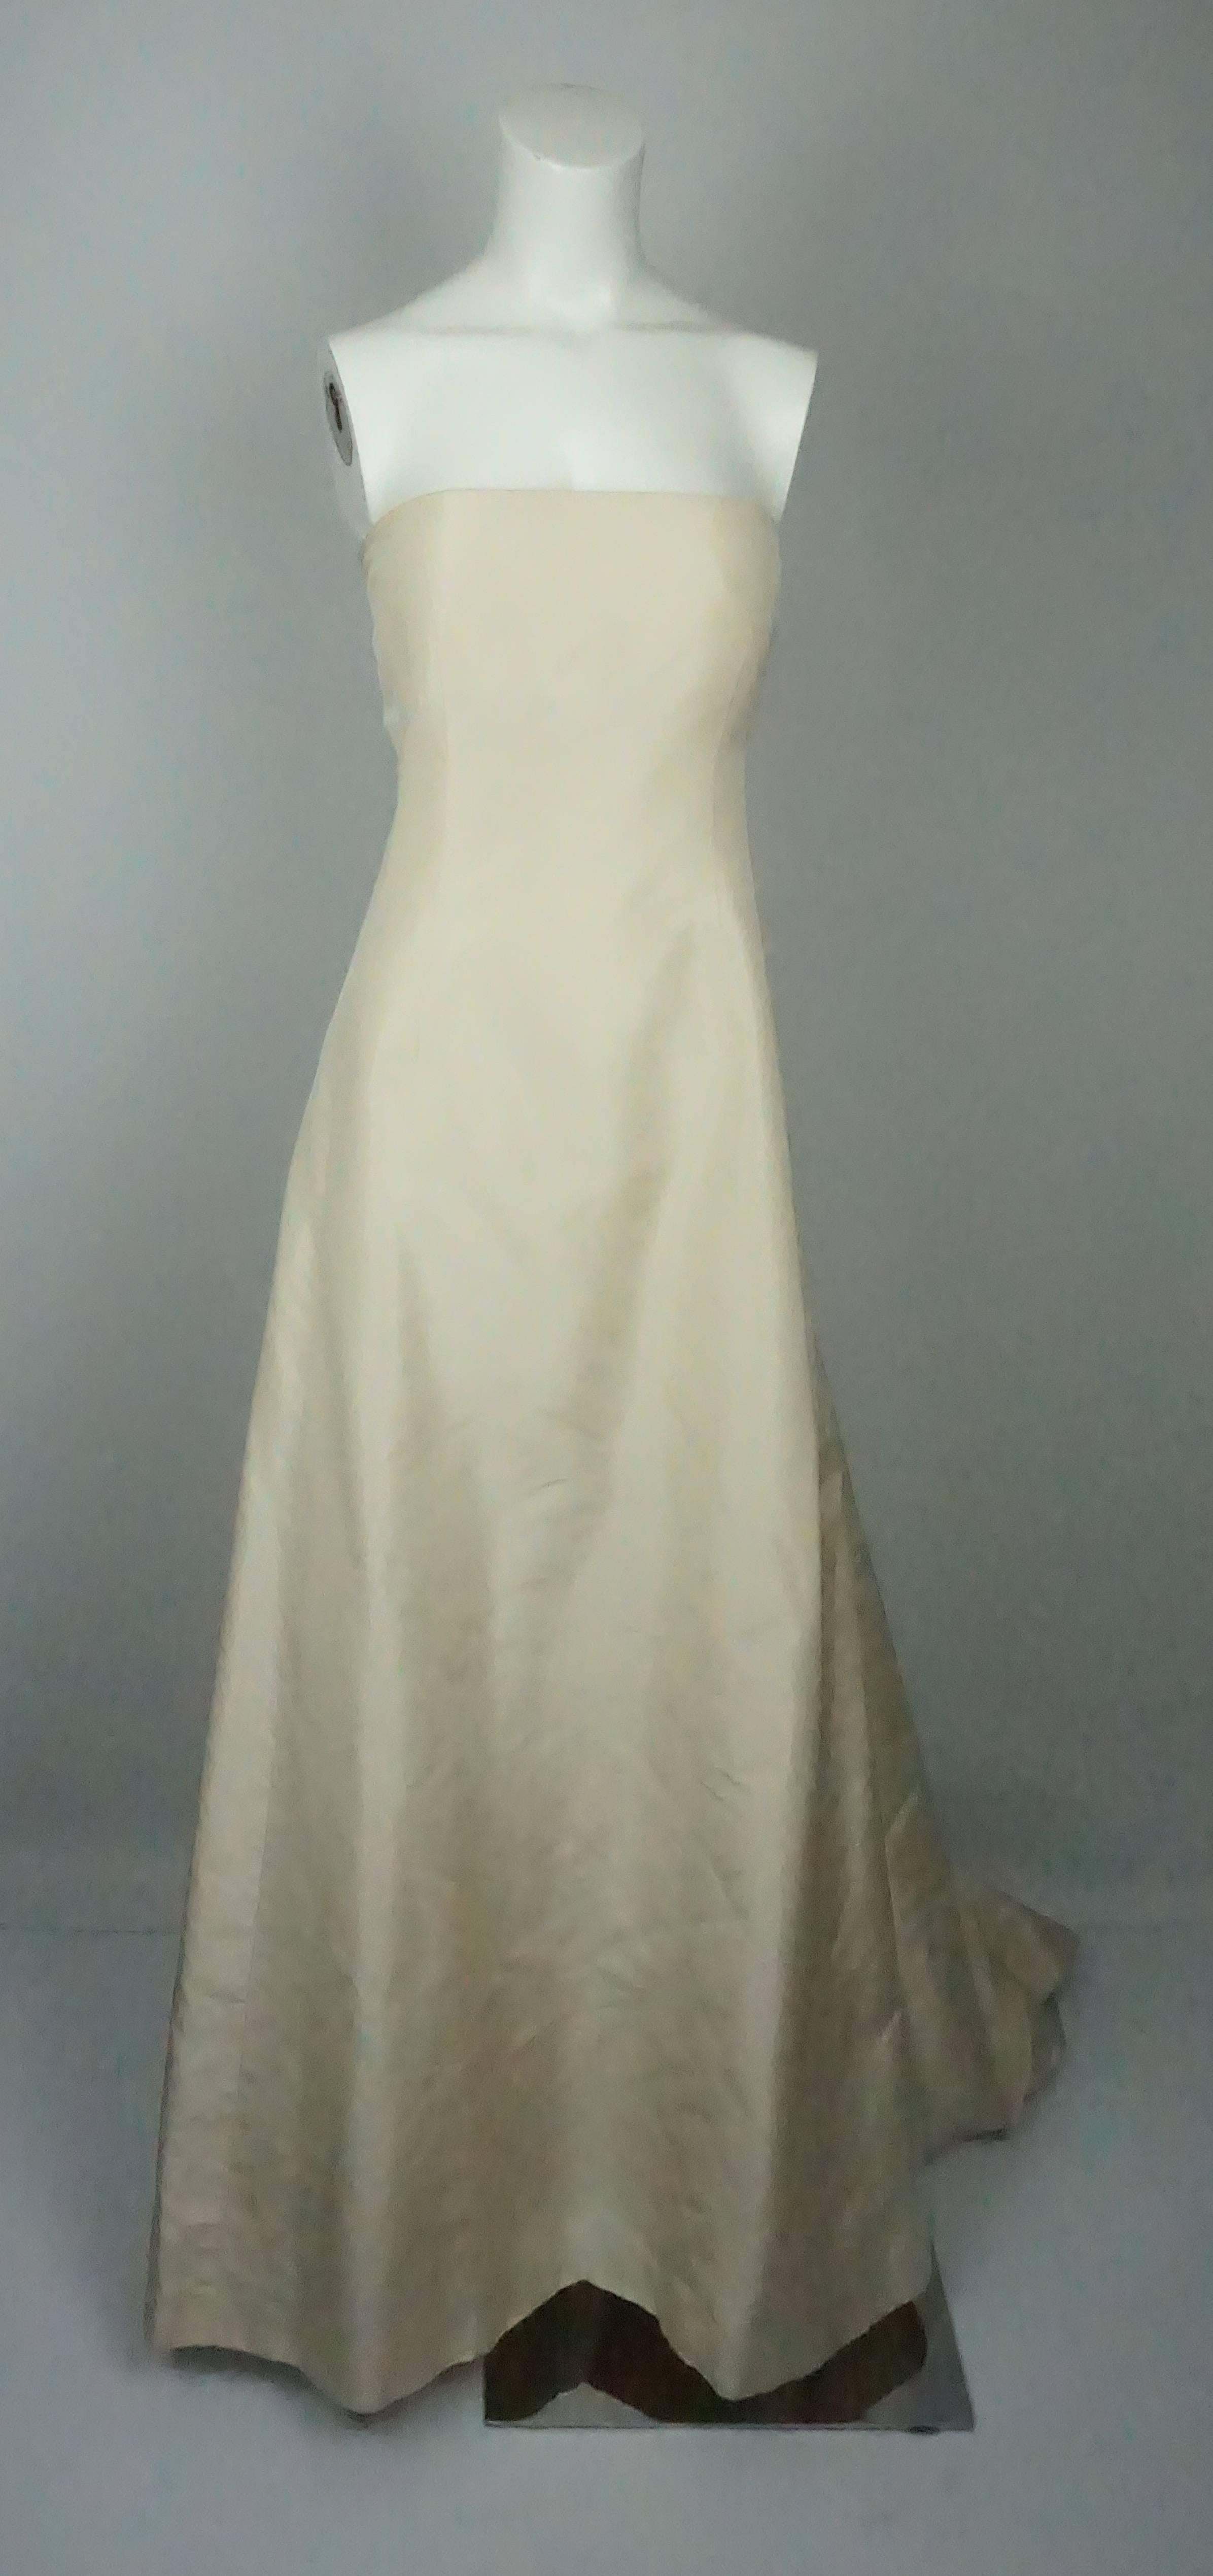 Oscar De La Renta Cream Silk Taffeta Strapless Gown - 4  This elegant gown is in excellent condition. It is strapless with a corset in the inside that has padding around the cleavage area. The gown is lined in silk organza and has a side zip with a